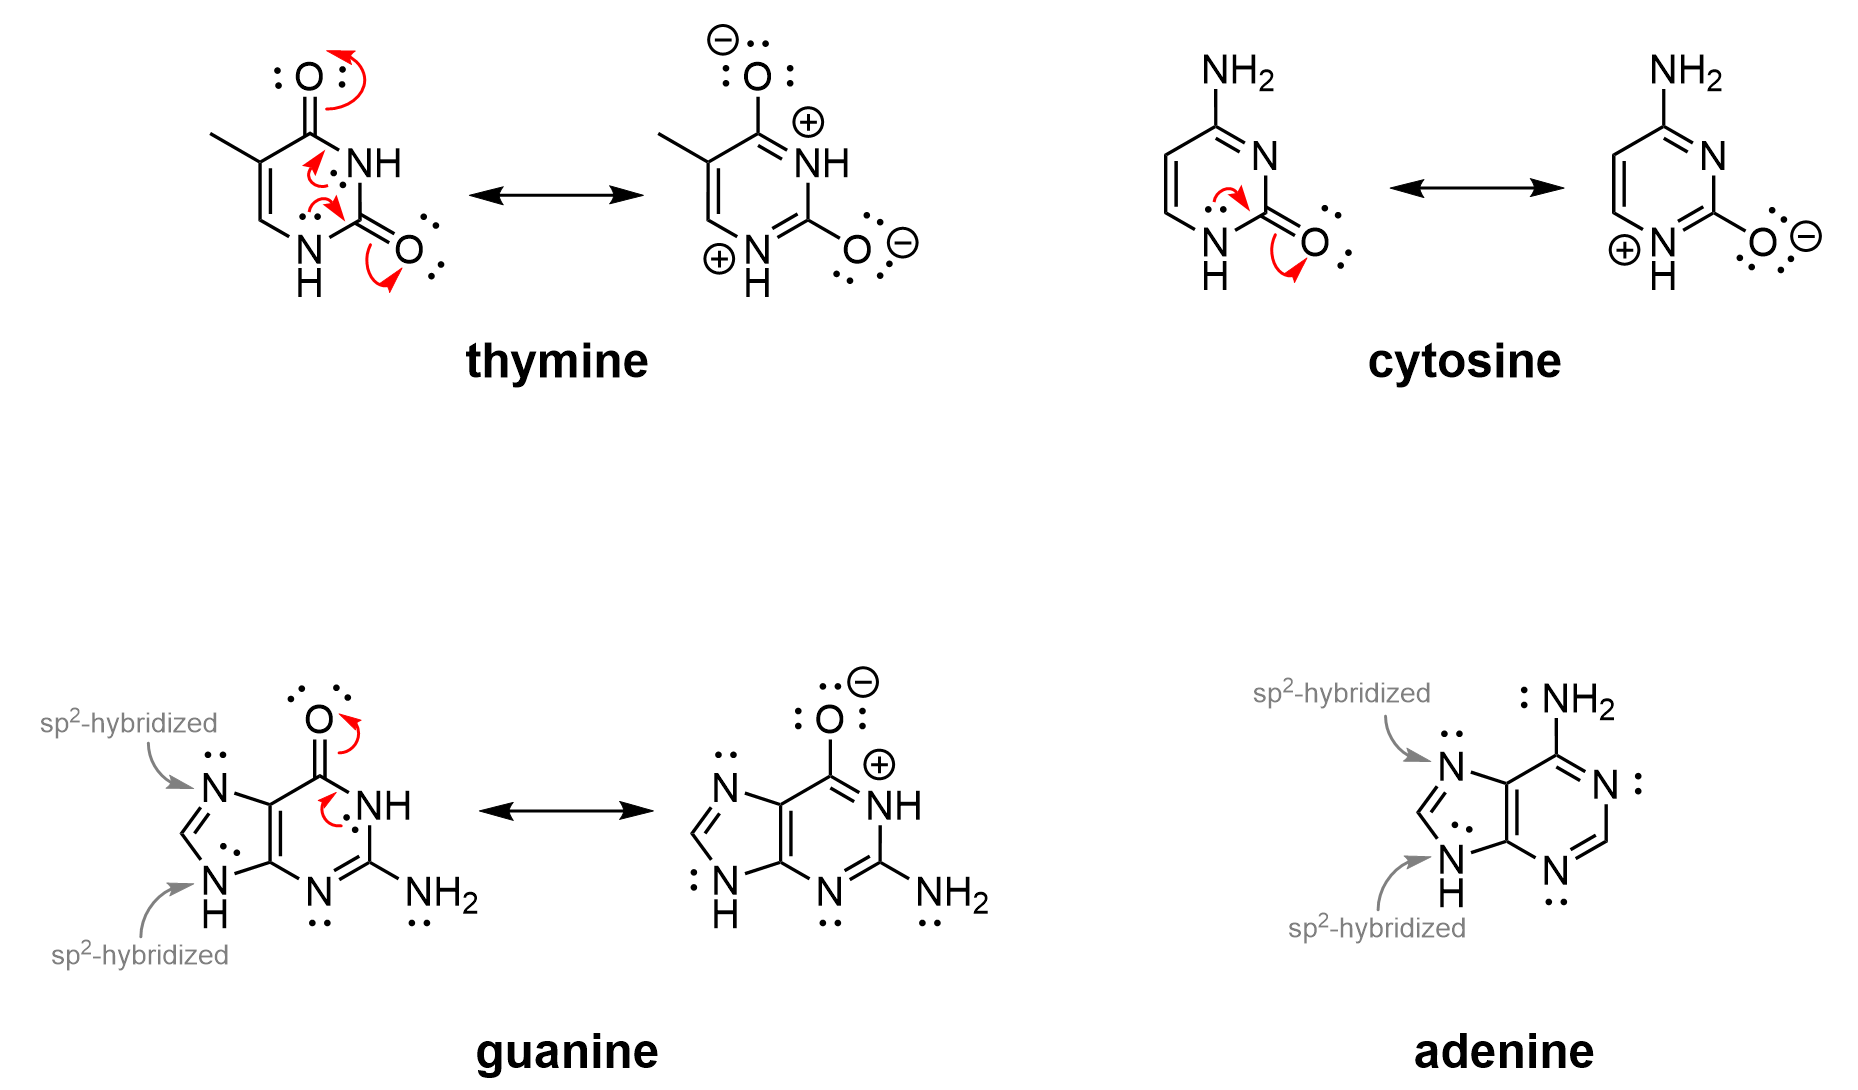 Line-bond structures of four molecules: thymine (two diagrams on the top left joined by resonance arrows), cytosine (two diagrams on the top right joined by resonance arrows), guanine (two diagrams on the bottom left joined by resonance arrows), and adenine (one diagram on the bottom right).Thymine consists of a six-membered ring. In the diagram on the left, clockwise from the top of the ring, there is a carbonyl carbon, which is singly bonded to a nitrogen atom with an attached hydrogen, which is singly bonded to a carbonyl carbon, which is singly bonded to a nitrogen atom with an attached hydrogen, which is singly bonded to a carbon atom, which is doubly bonded to a carbon atom with an attached methyl group, which is then attached to the carbonyl carbon at the top of the ring. Lone pairs of electrons are shown as follows: two lone pairs on each oxygen atom that is part of the carbonyl groups; one lone pair on each nitrogen atom that is part of the six-membered ring.   There are four curved arrows in the left diagram of thymine. Starting at the bottom of the six-membered ring, one curved arrow has its tail end starting at the lone pair of electrons on nitrogen, and the head of the arrow pointing to the bond between this nitrogen and the carbonyl carbon atom on the bottom right of the of the six-membered ring. A second curved arrow is at the carbonyl group at the bottom right of the molecule, with the tail end starting at the double bond between carbon and oxygen, and the head of the arrow pointing to the oxygen atom. A third curved arrow has its tail end starting at the lone pair of electrons on nitrogen at the top right side of the six-membered ring, and the head of the arrow pointing to the bond between this nitrogen and the carbonyl carbon atom at the top of the of the six-membered ring. A fourth curved arrow is at the carbonyl group at the top of the molecule, with its tail end starting at the double bond between carbon and oxygen, and the head of the arrow pointing to the oxygen.   In the right diagram of thymine, there is a six-membered ring with alternating single and double bonds. Clockwise from the top of the ring, there is a carbon atom with an attached singly bonded oxygen. The carbon atom is doubly bonded to a nitrogen atom with an attached hydrogen, which is singly bonded to a carbonyl carbon, which is singly bonded to a nitrogen atom with an attached hydrogen, which is singly bonded to a carbon atom. This carbon atom has an attached singly bonded oxygen. The carbon atom is doubly bonded to a nitrogen atom with an attached hydrogen, which is singly bonded to a carbon atom, which is doubly bonded to a carbon atom with an attached methyl group, which is then attached to the carbon at the top of the ring. Both nitrogen atoms have a formal positive charge. Both oxygen atoms have a formal negative charge and three lone pairs of electrons.  The other molecules of cytosine, adenine, guanine are similarly depicted, highlighting their aromatic nature through curved arrows.